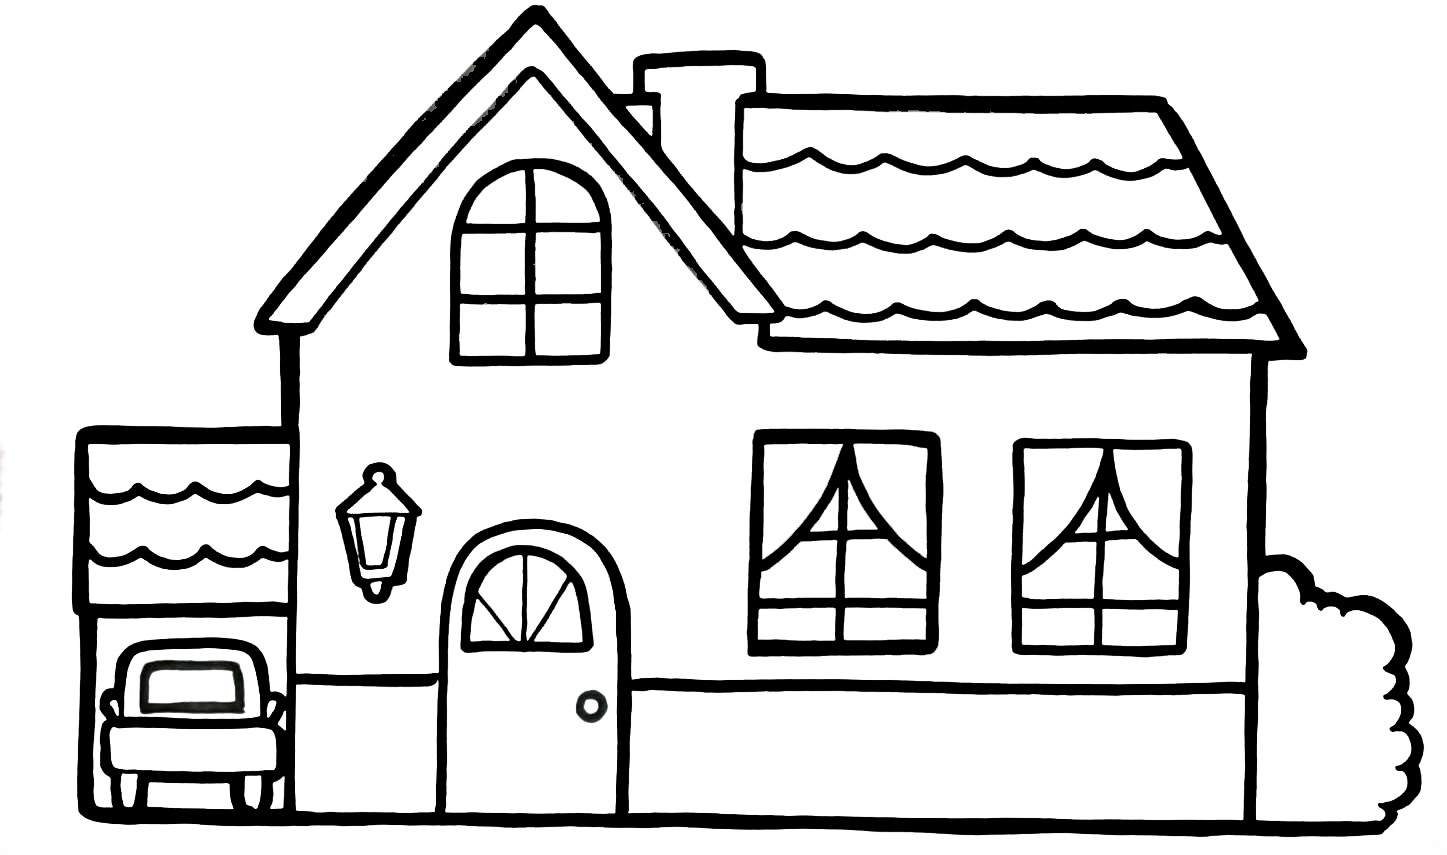 Coloring page For kids A house for children